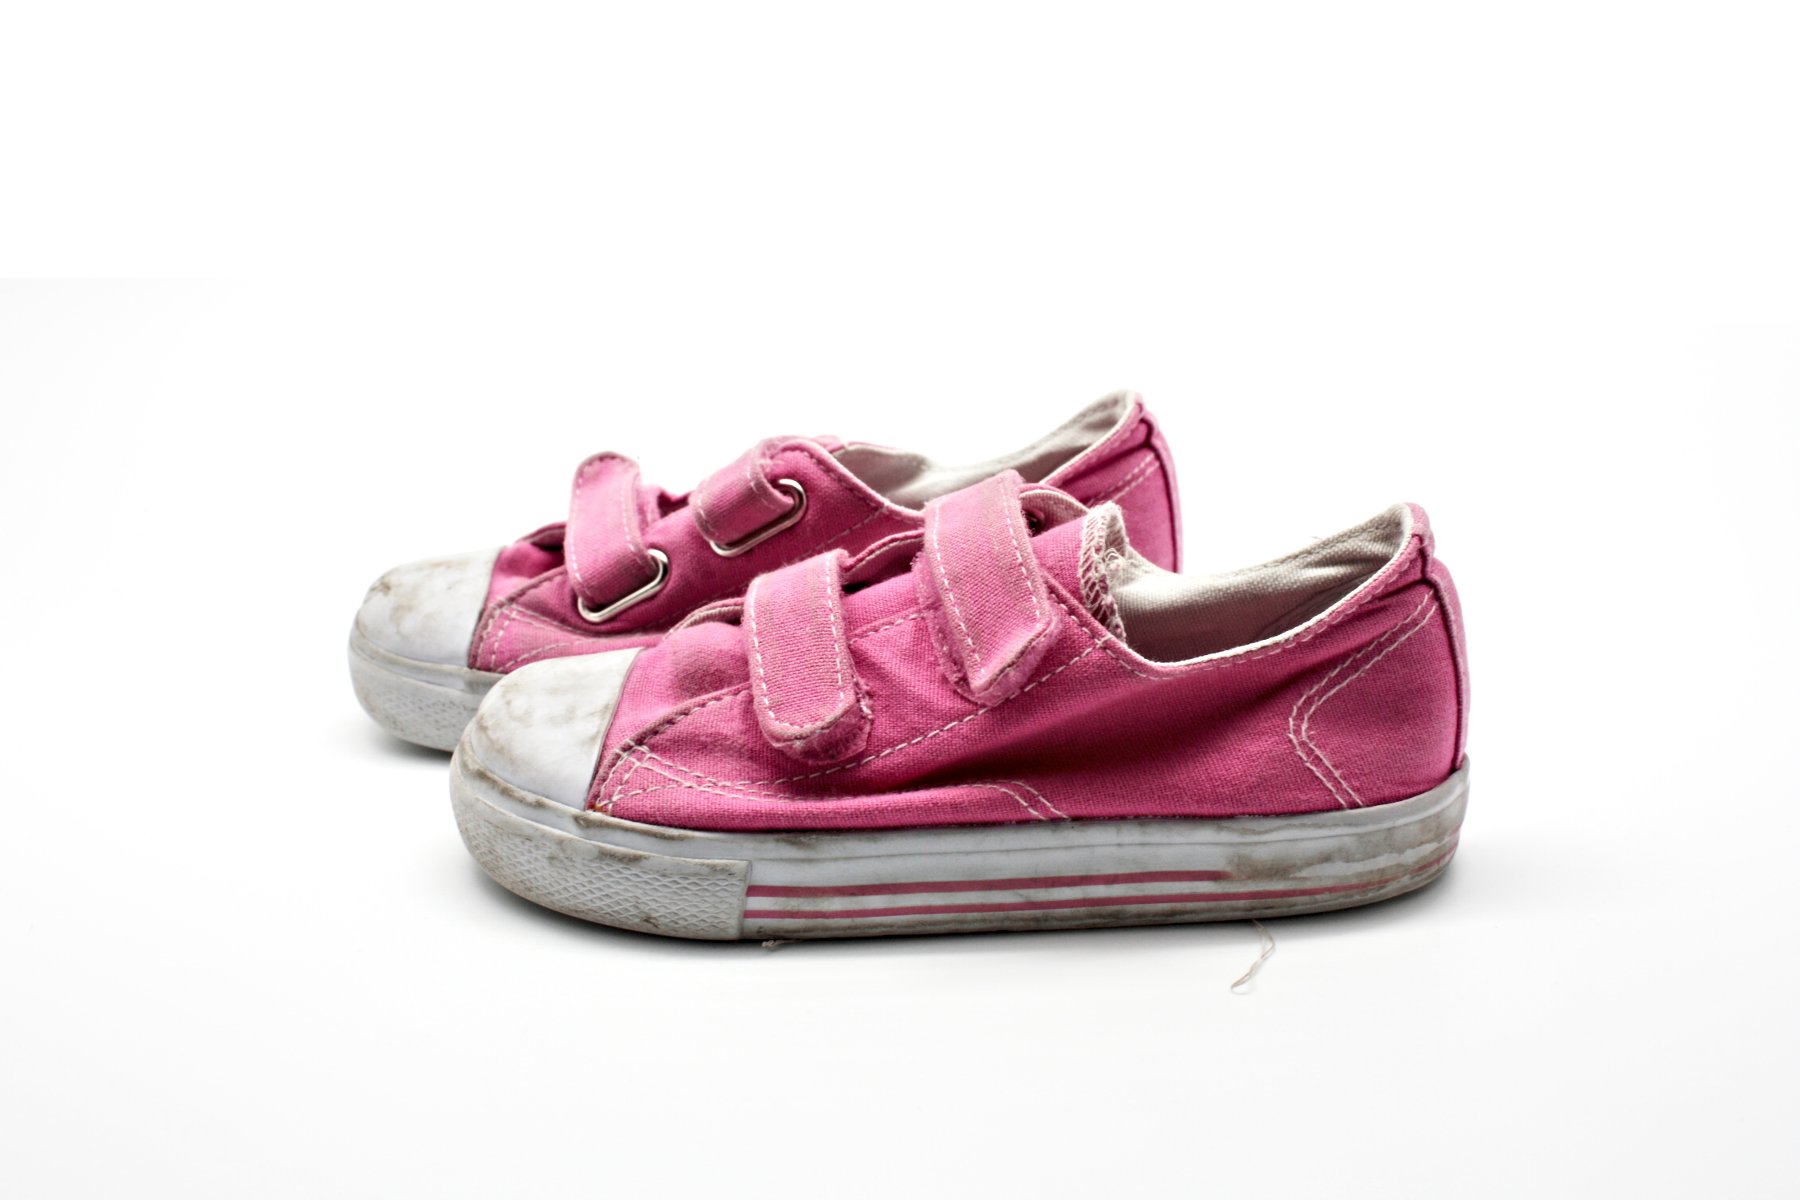 Old pink sneakers photo